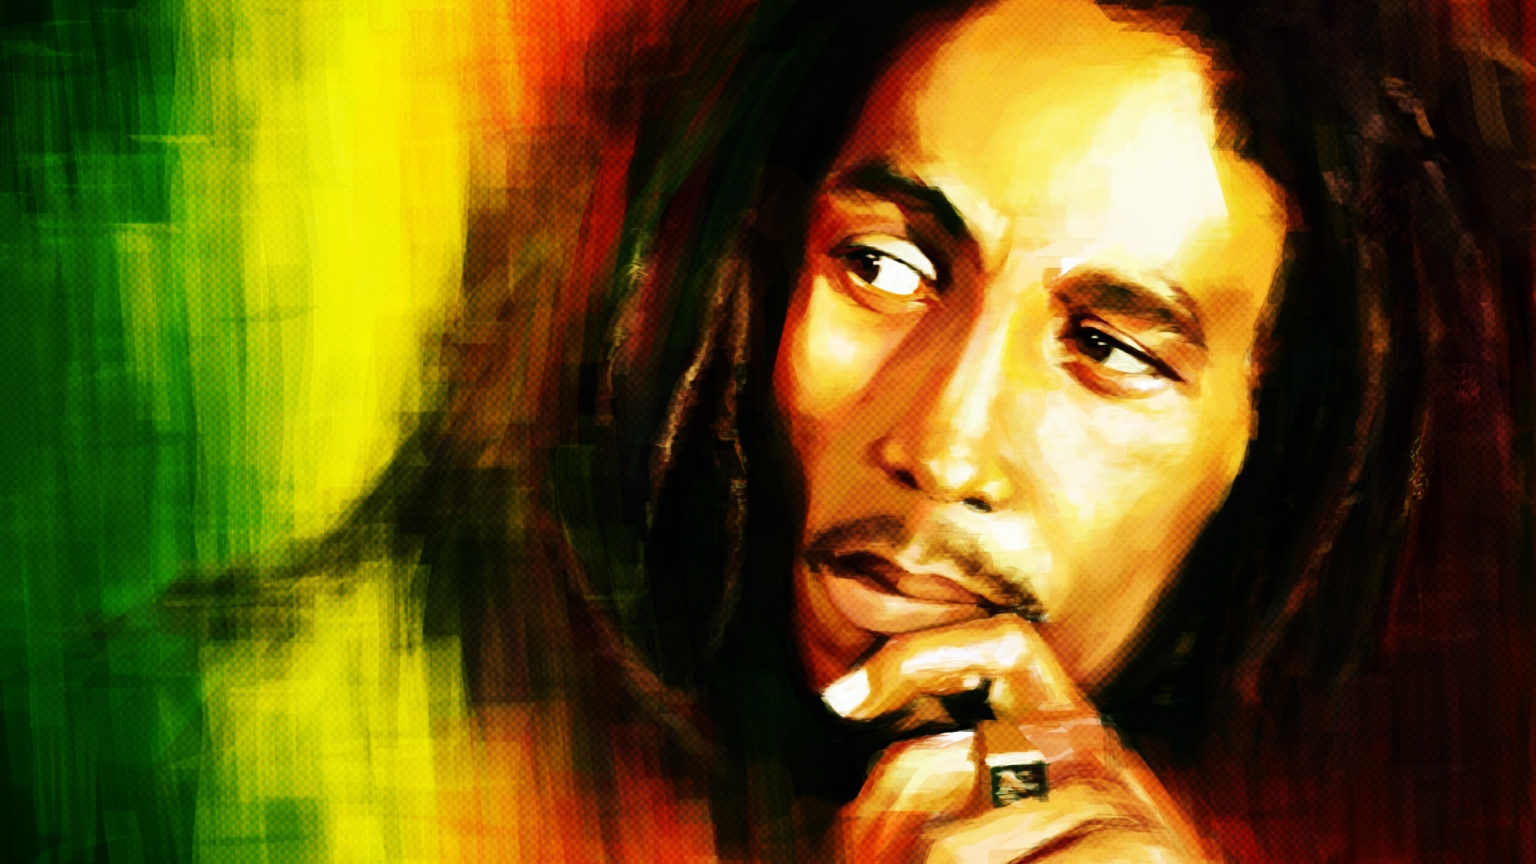 Bob Marley Portrait Painting for 1536 x 864 HDTV resolution